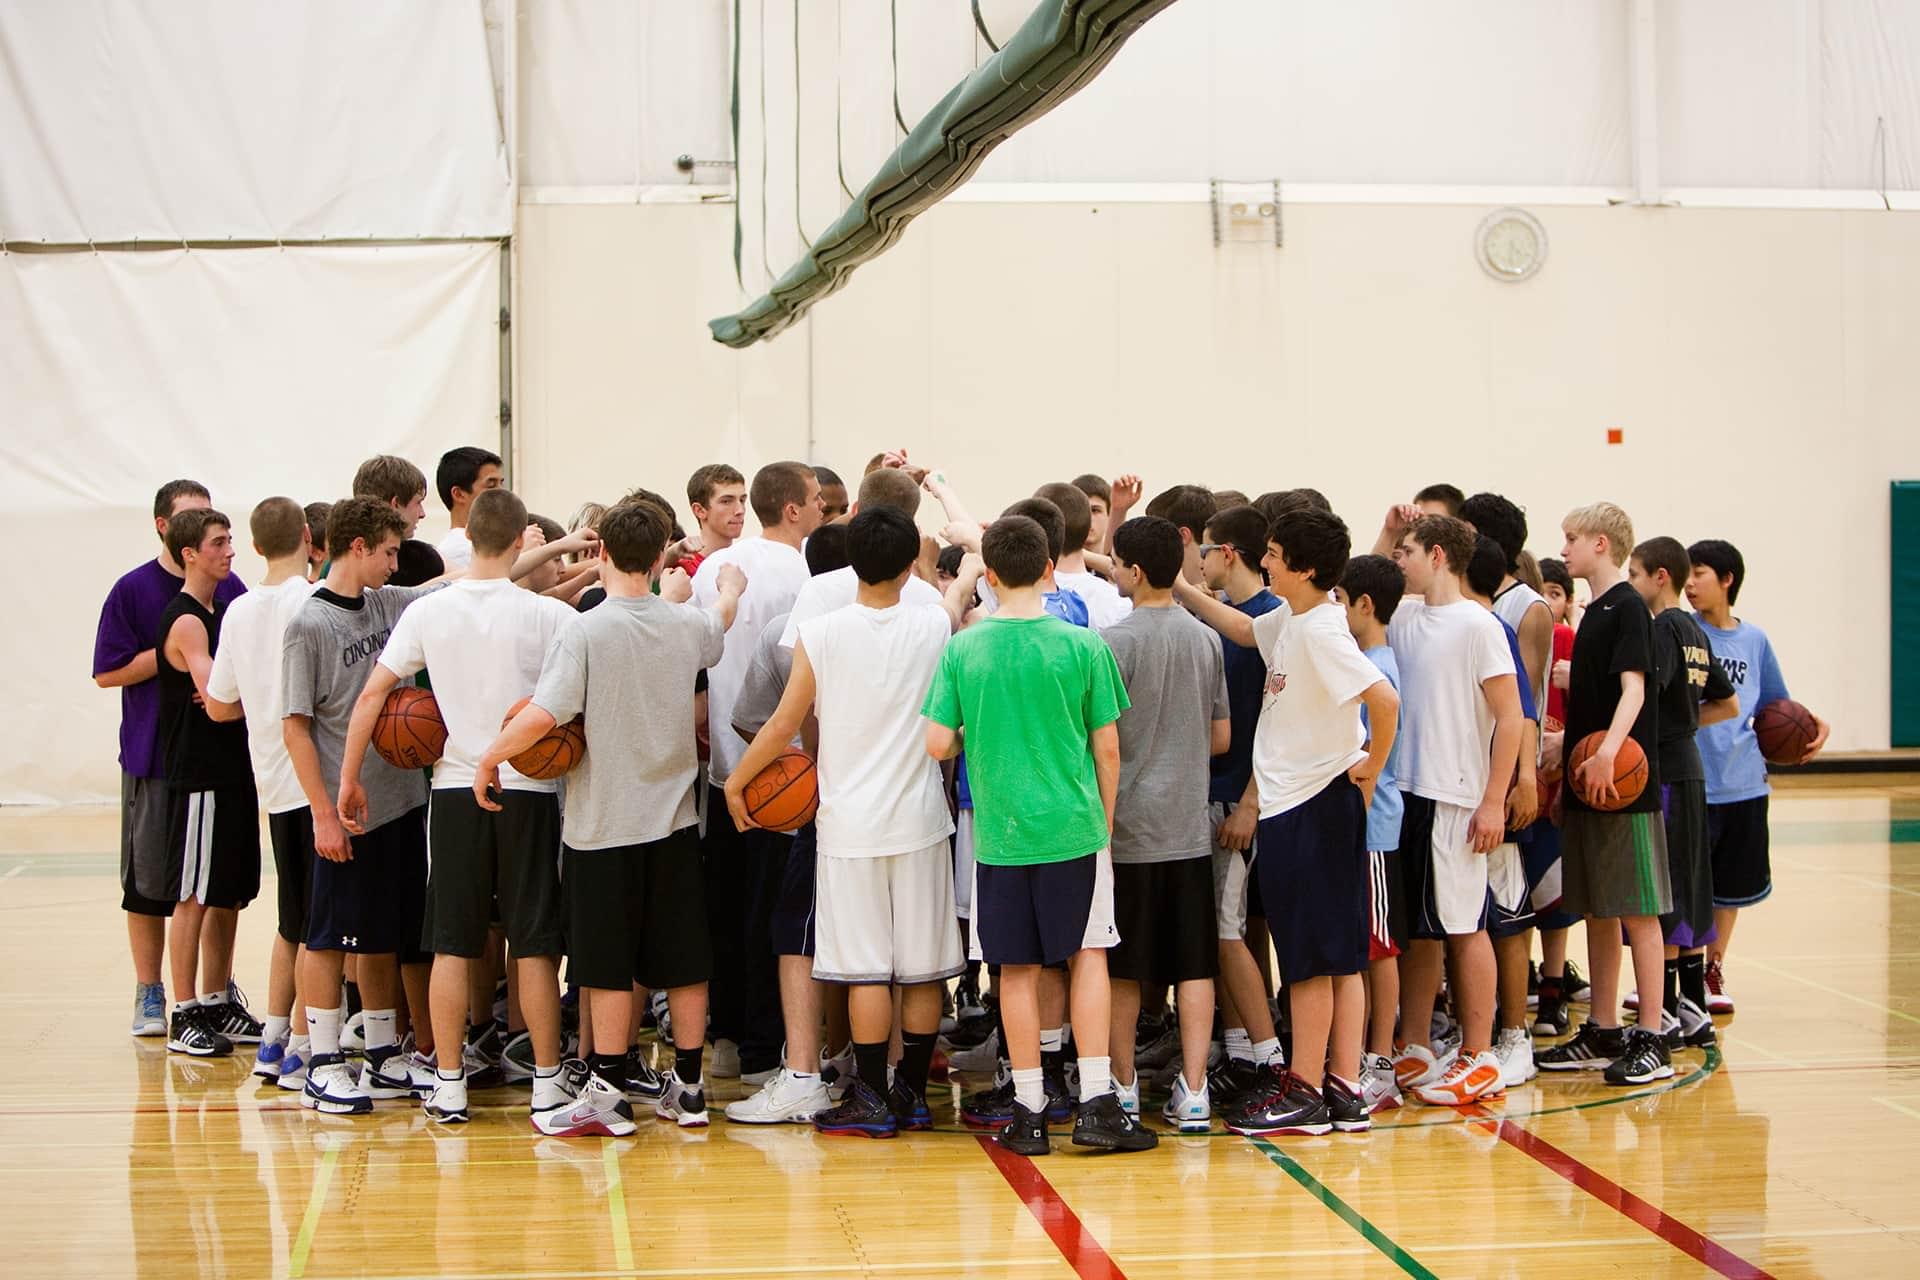 Group of young men getting ready to play basketball